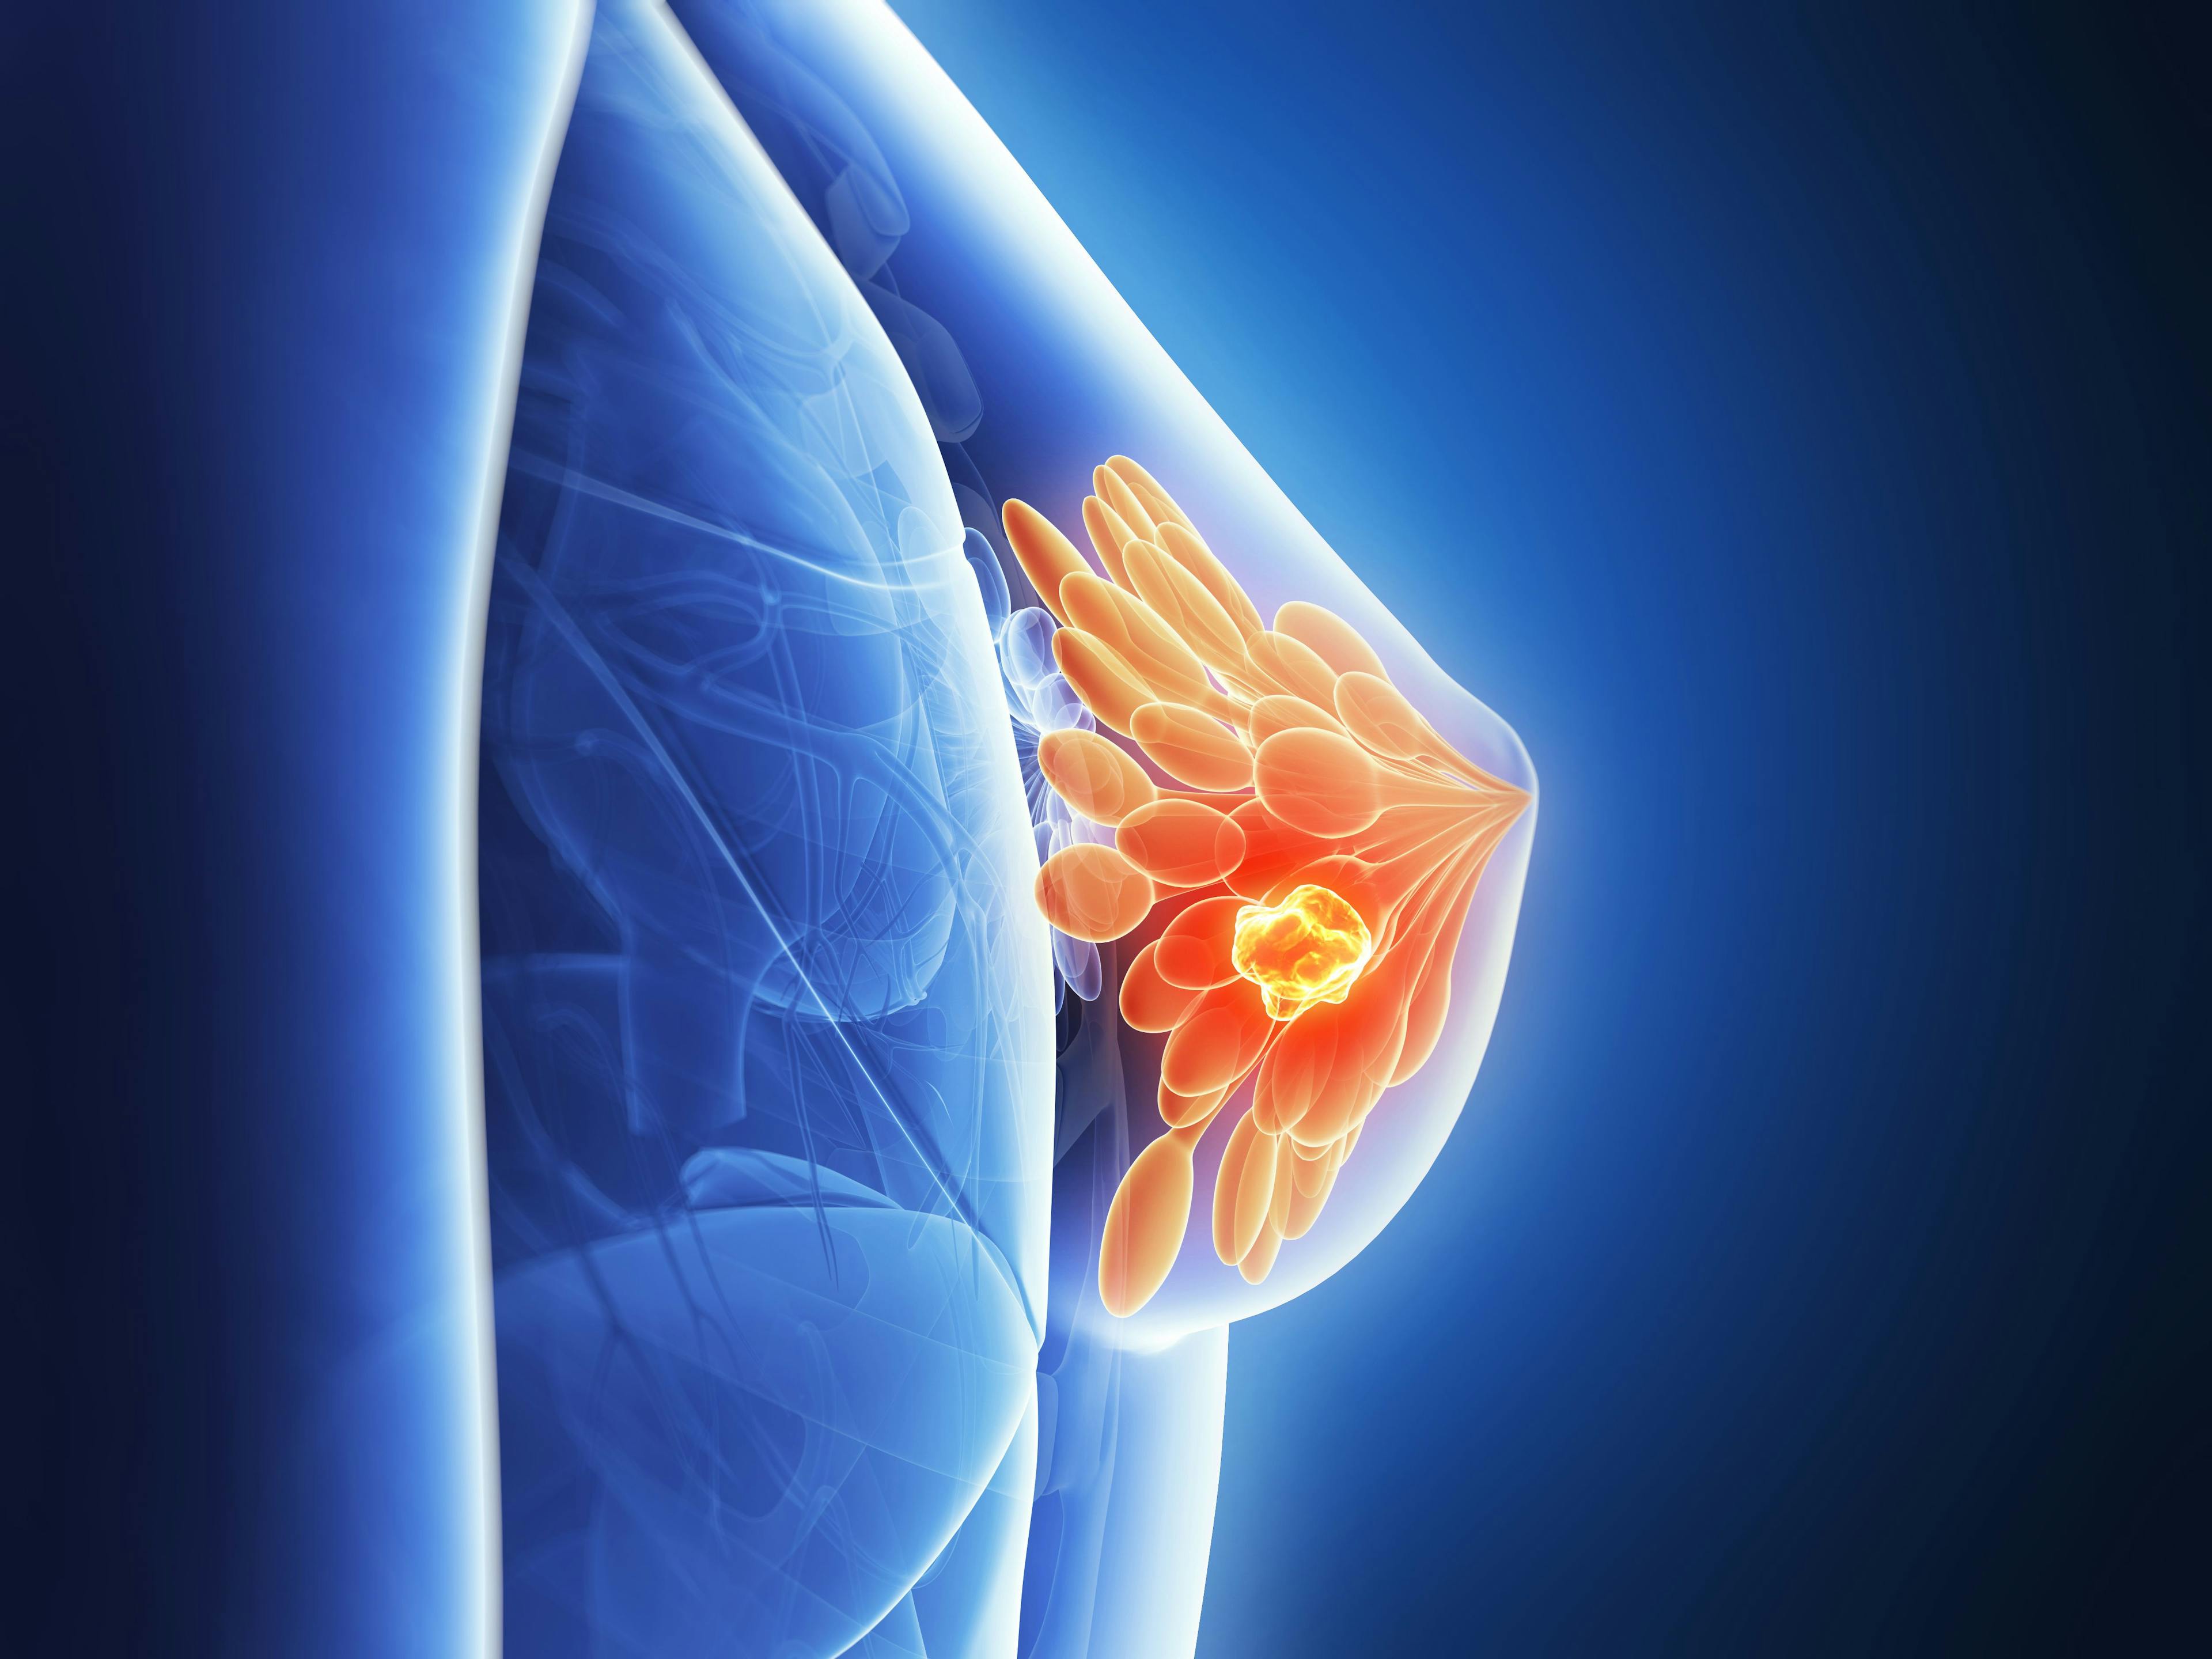 Truqap Combination Approved by FDA for HR-Positive, HER2-Negative Locally Advanced, Metastatic Breast Cancer